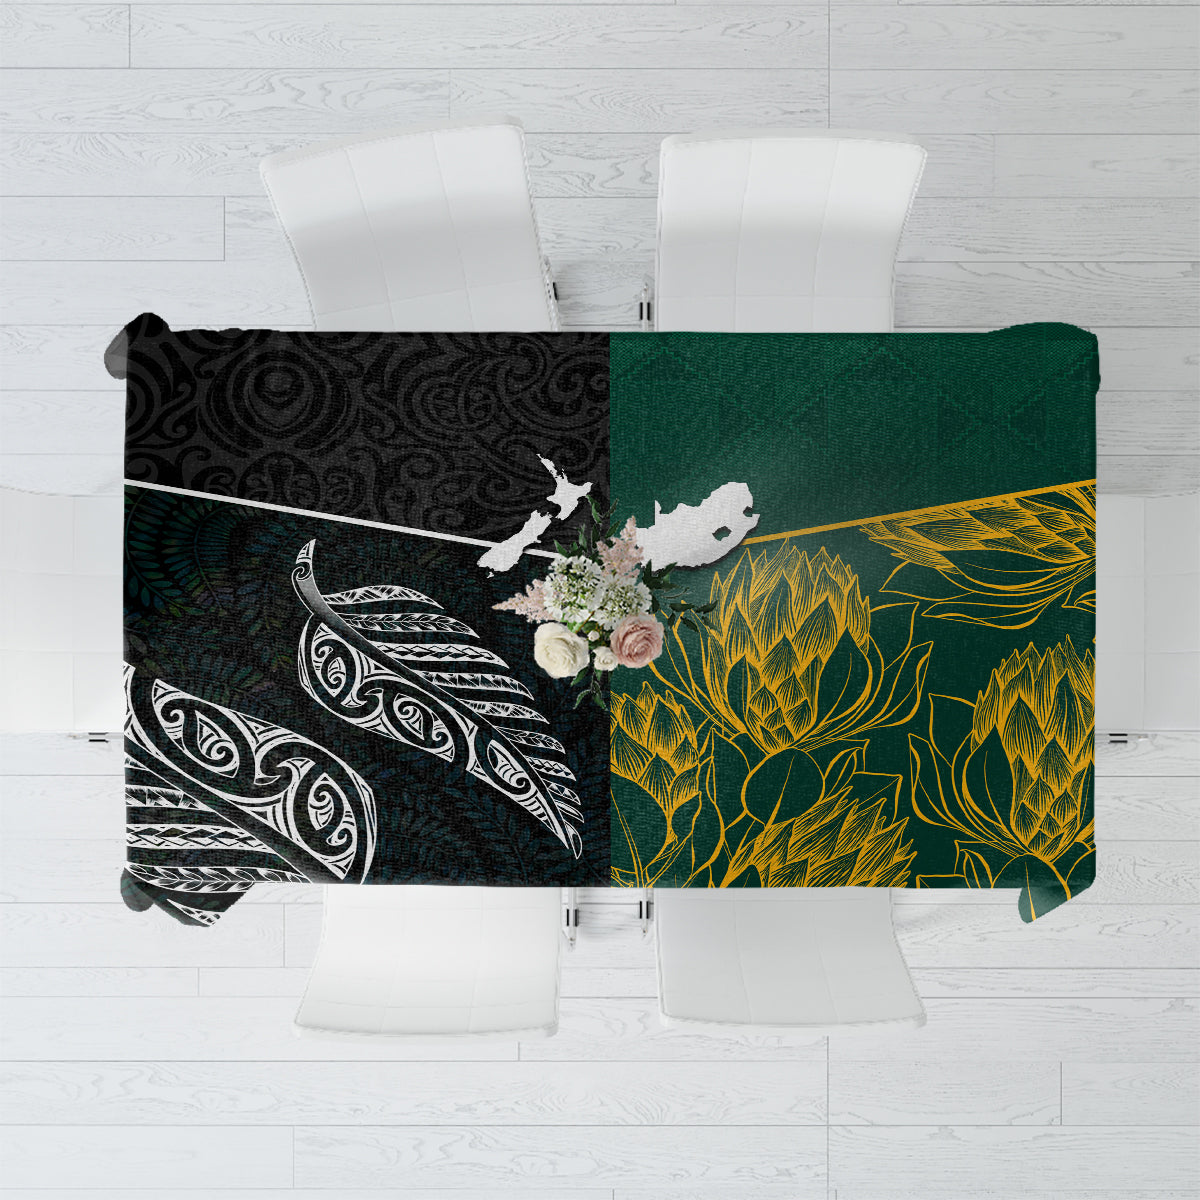 South Africa and New Zealand Tablecloth King Protea and Silver Fern Mix Culture Pattern LT03 Black - Polynesian Pride